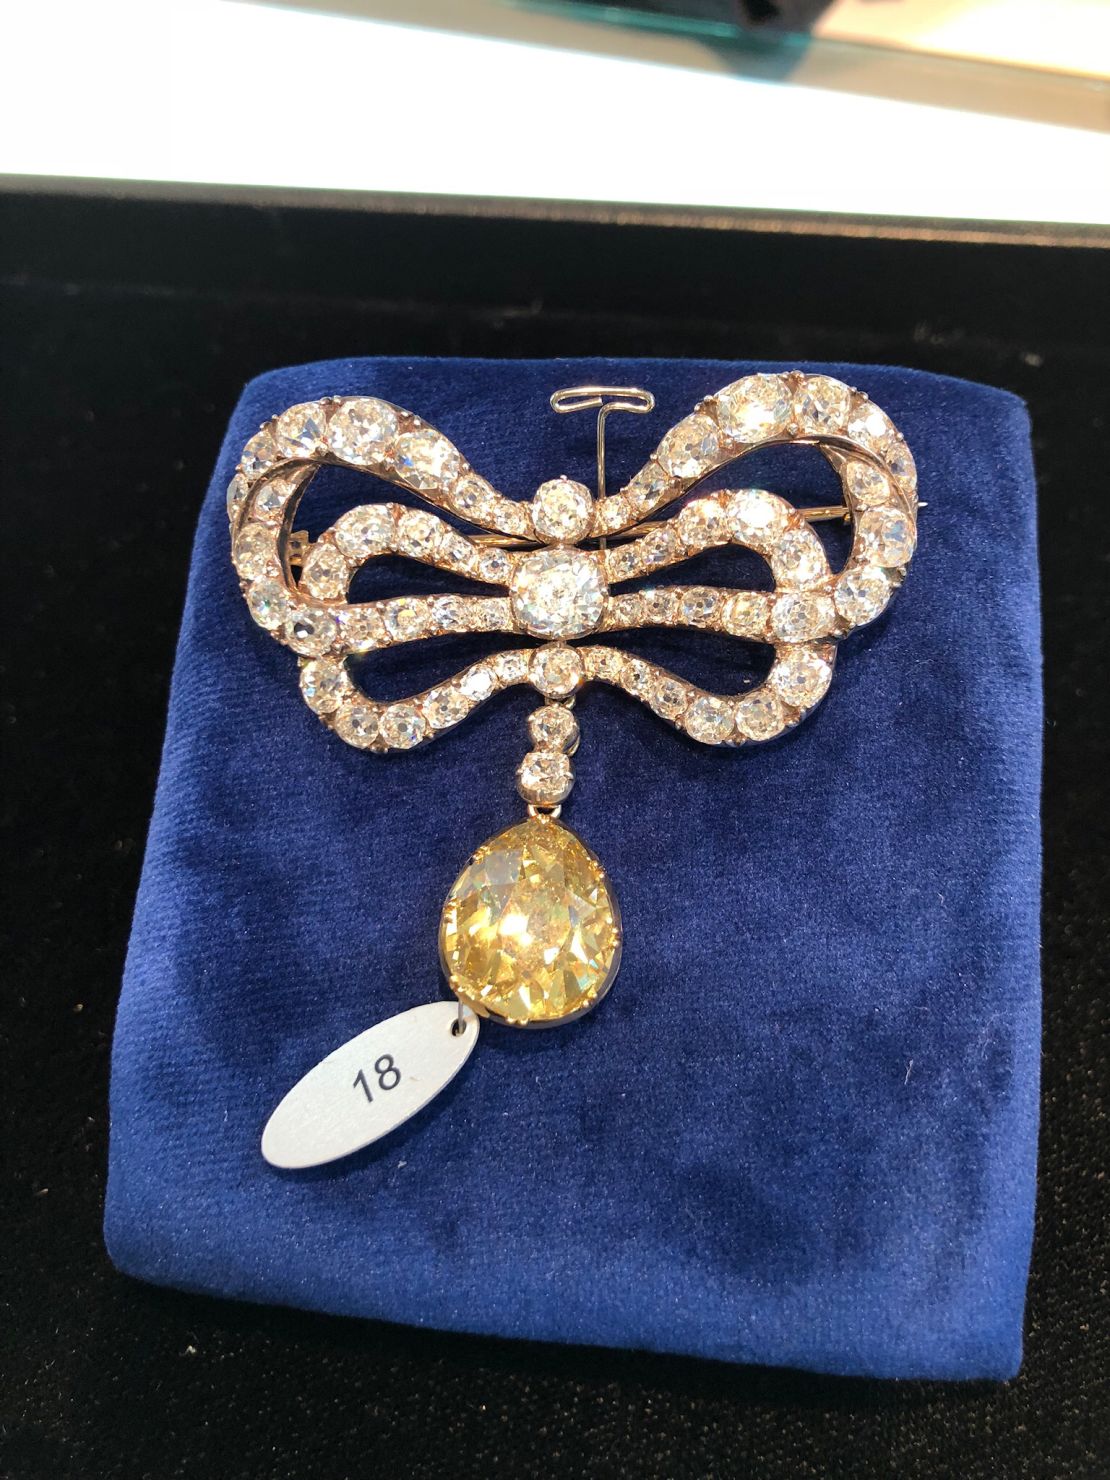 The jewelry formerly belonging to Marie Antoinette also includes a diamond double ribbon bow brooch valued between $50,000 and $80,000. 